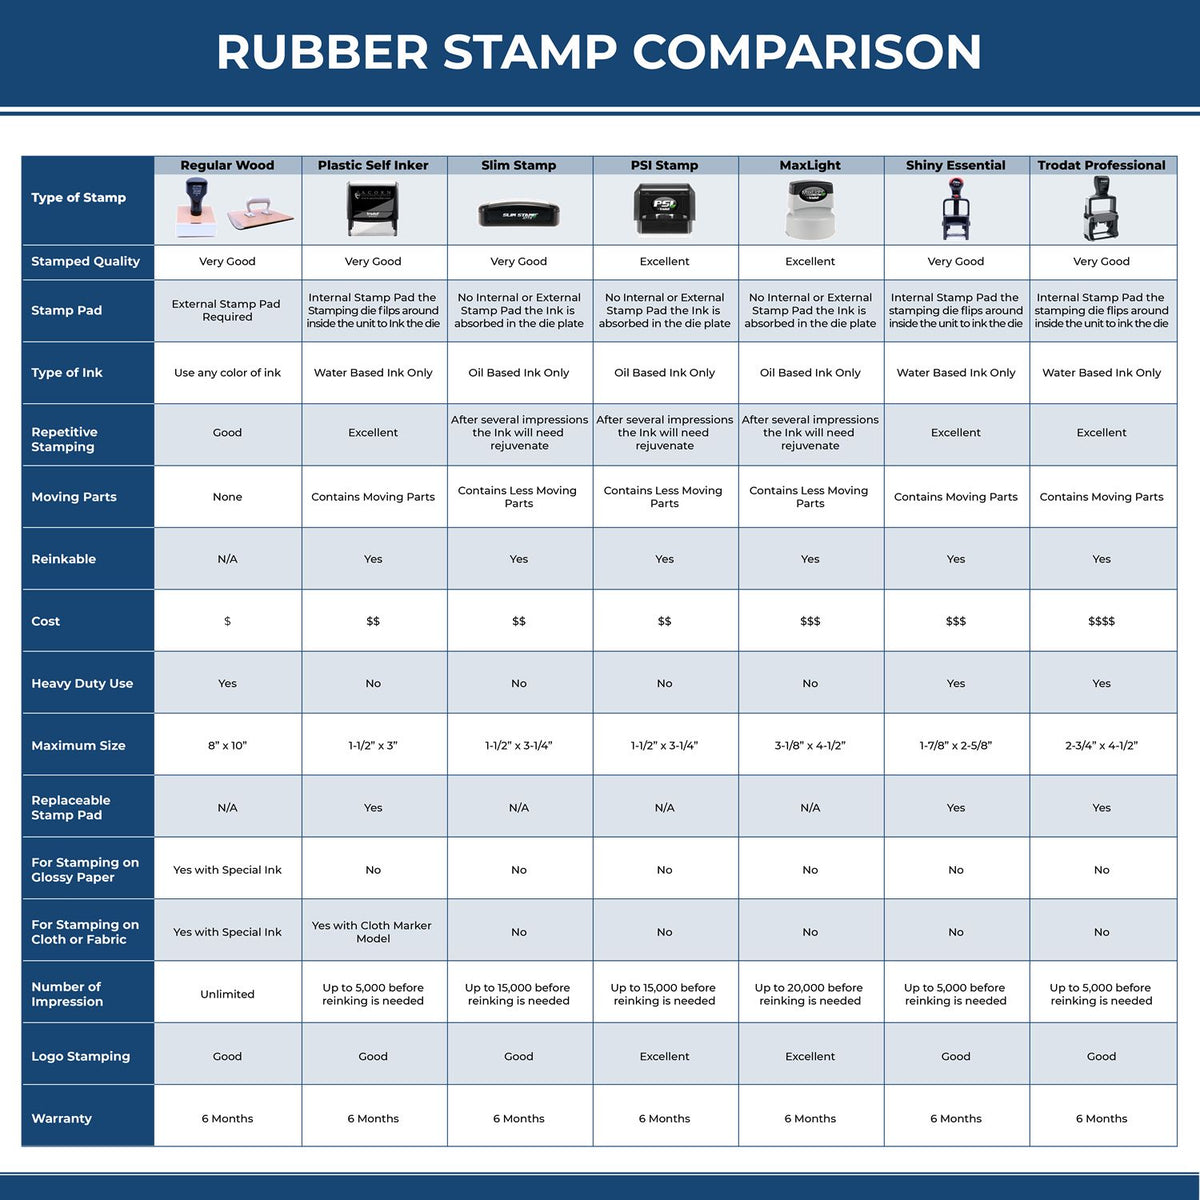 Large Self Inking Authorizations Revoked Stamp 4543S Rubber Stamp Comparison